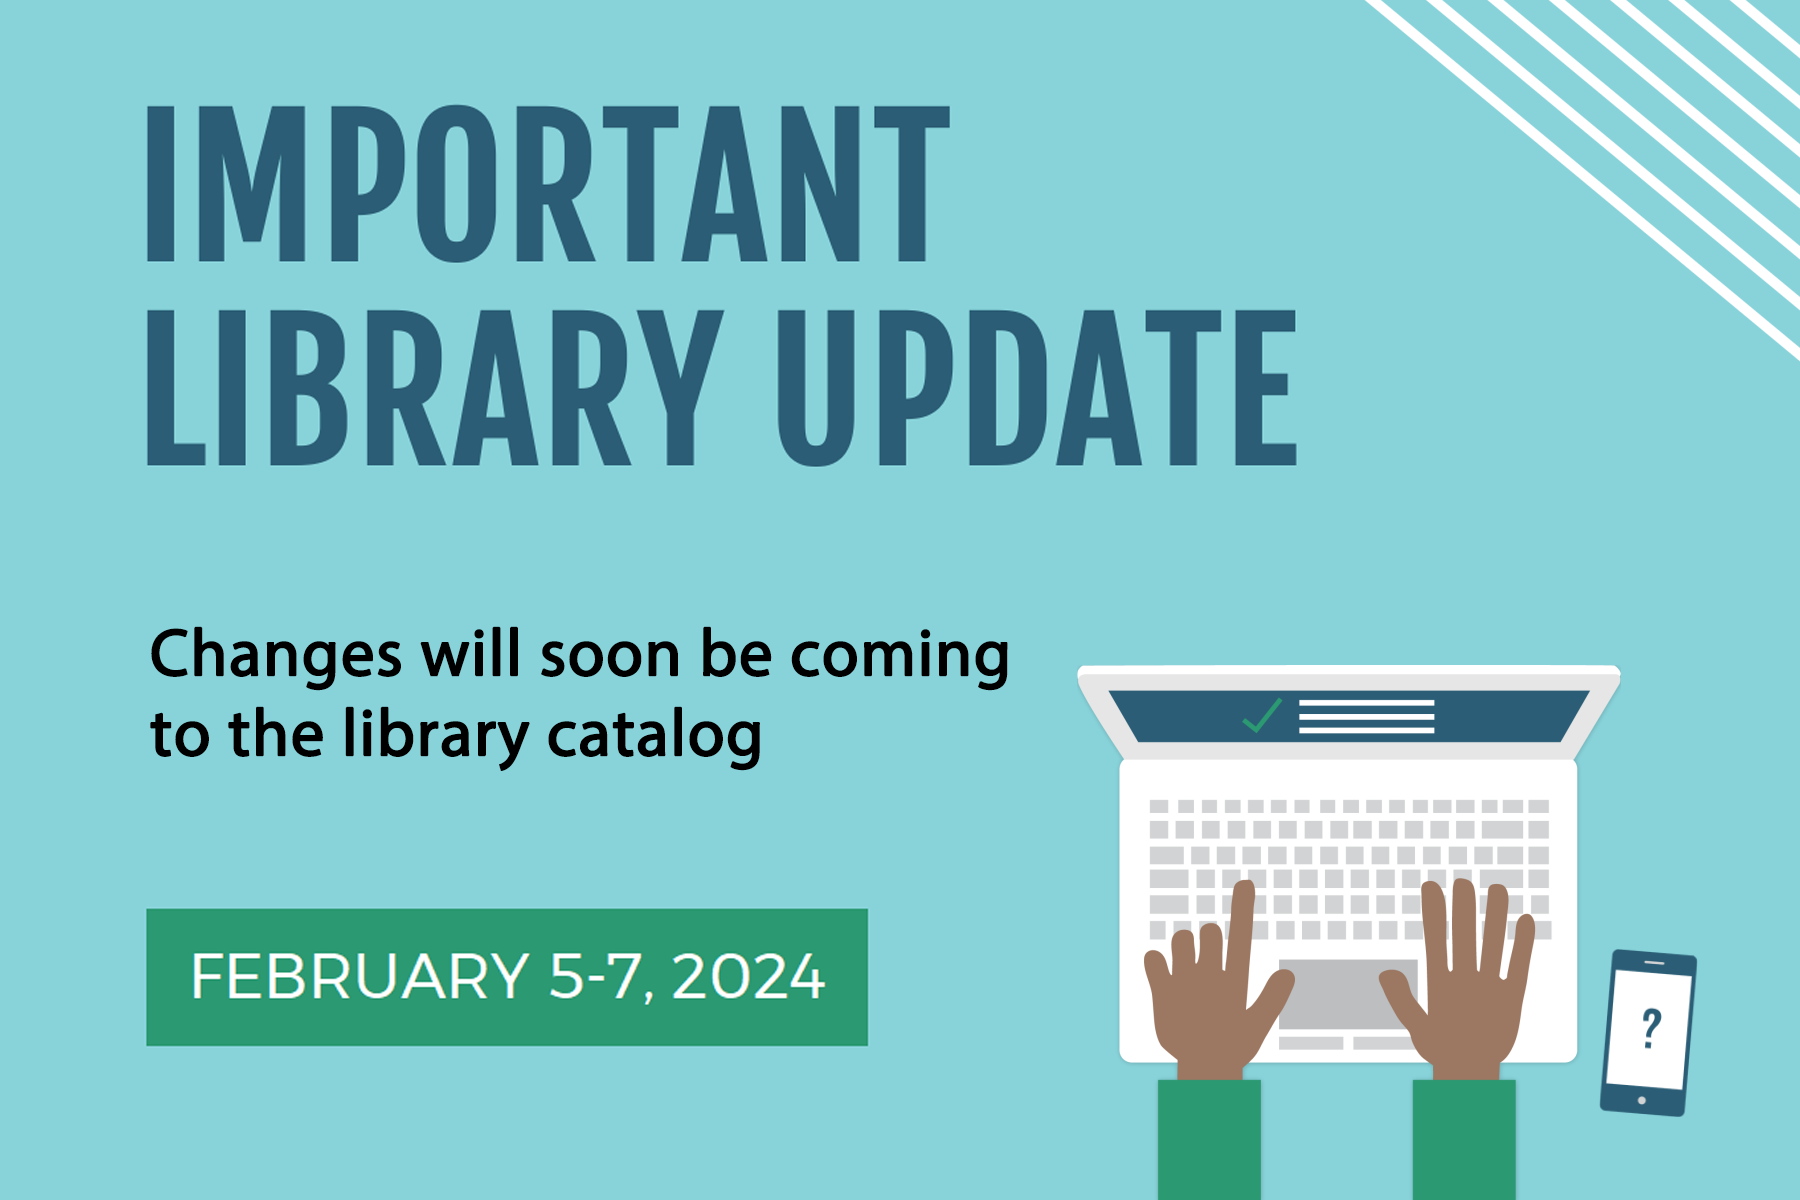 TURQUOISE BACKGROUND WITH TEXT READING "IMPORTANT LIBRARY UPDATE; CHANGES SOON WILL BE COMING TO THE LIBRARY CATALOG, FEBRUARY 75-7, 2024"